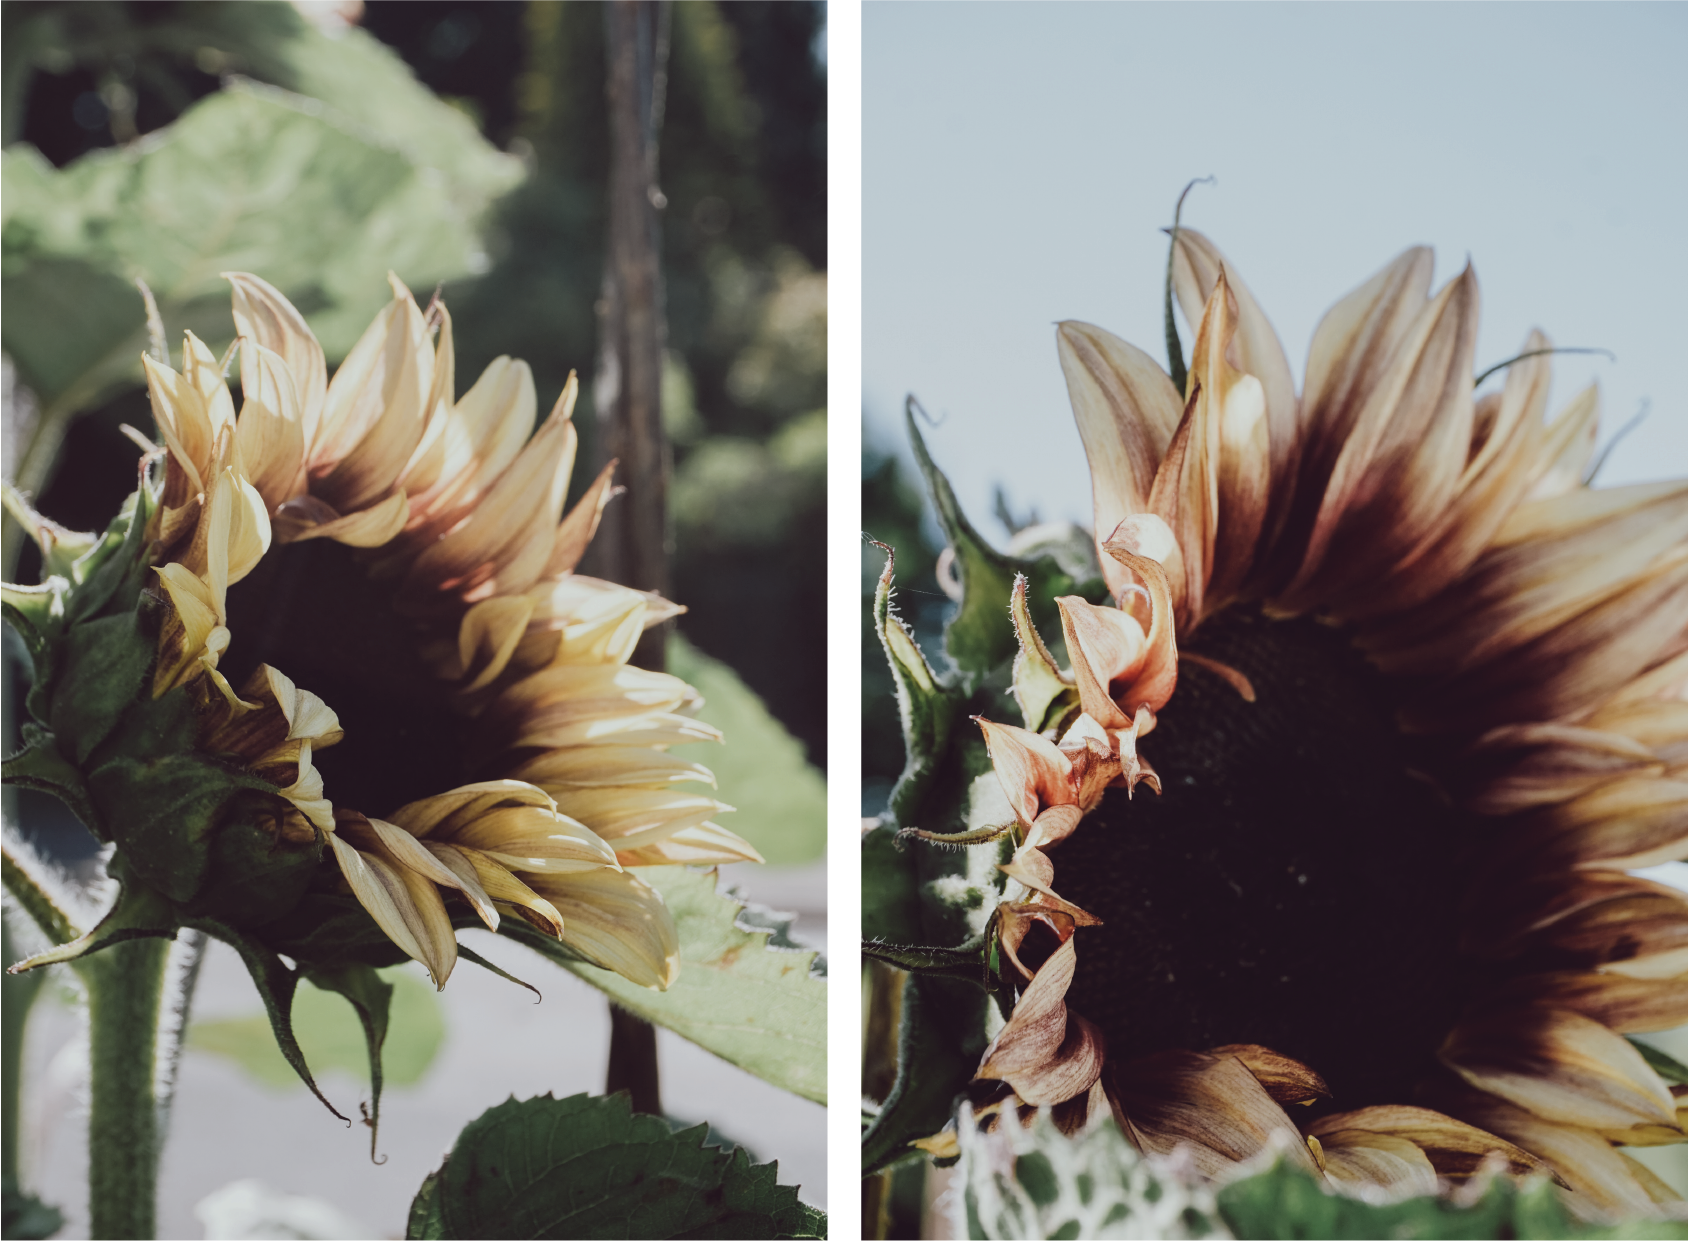 CHAPTER 2. SUNFLOWERS